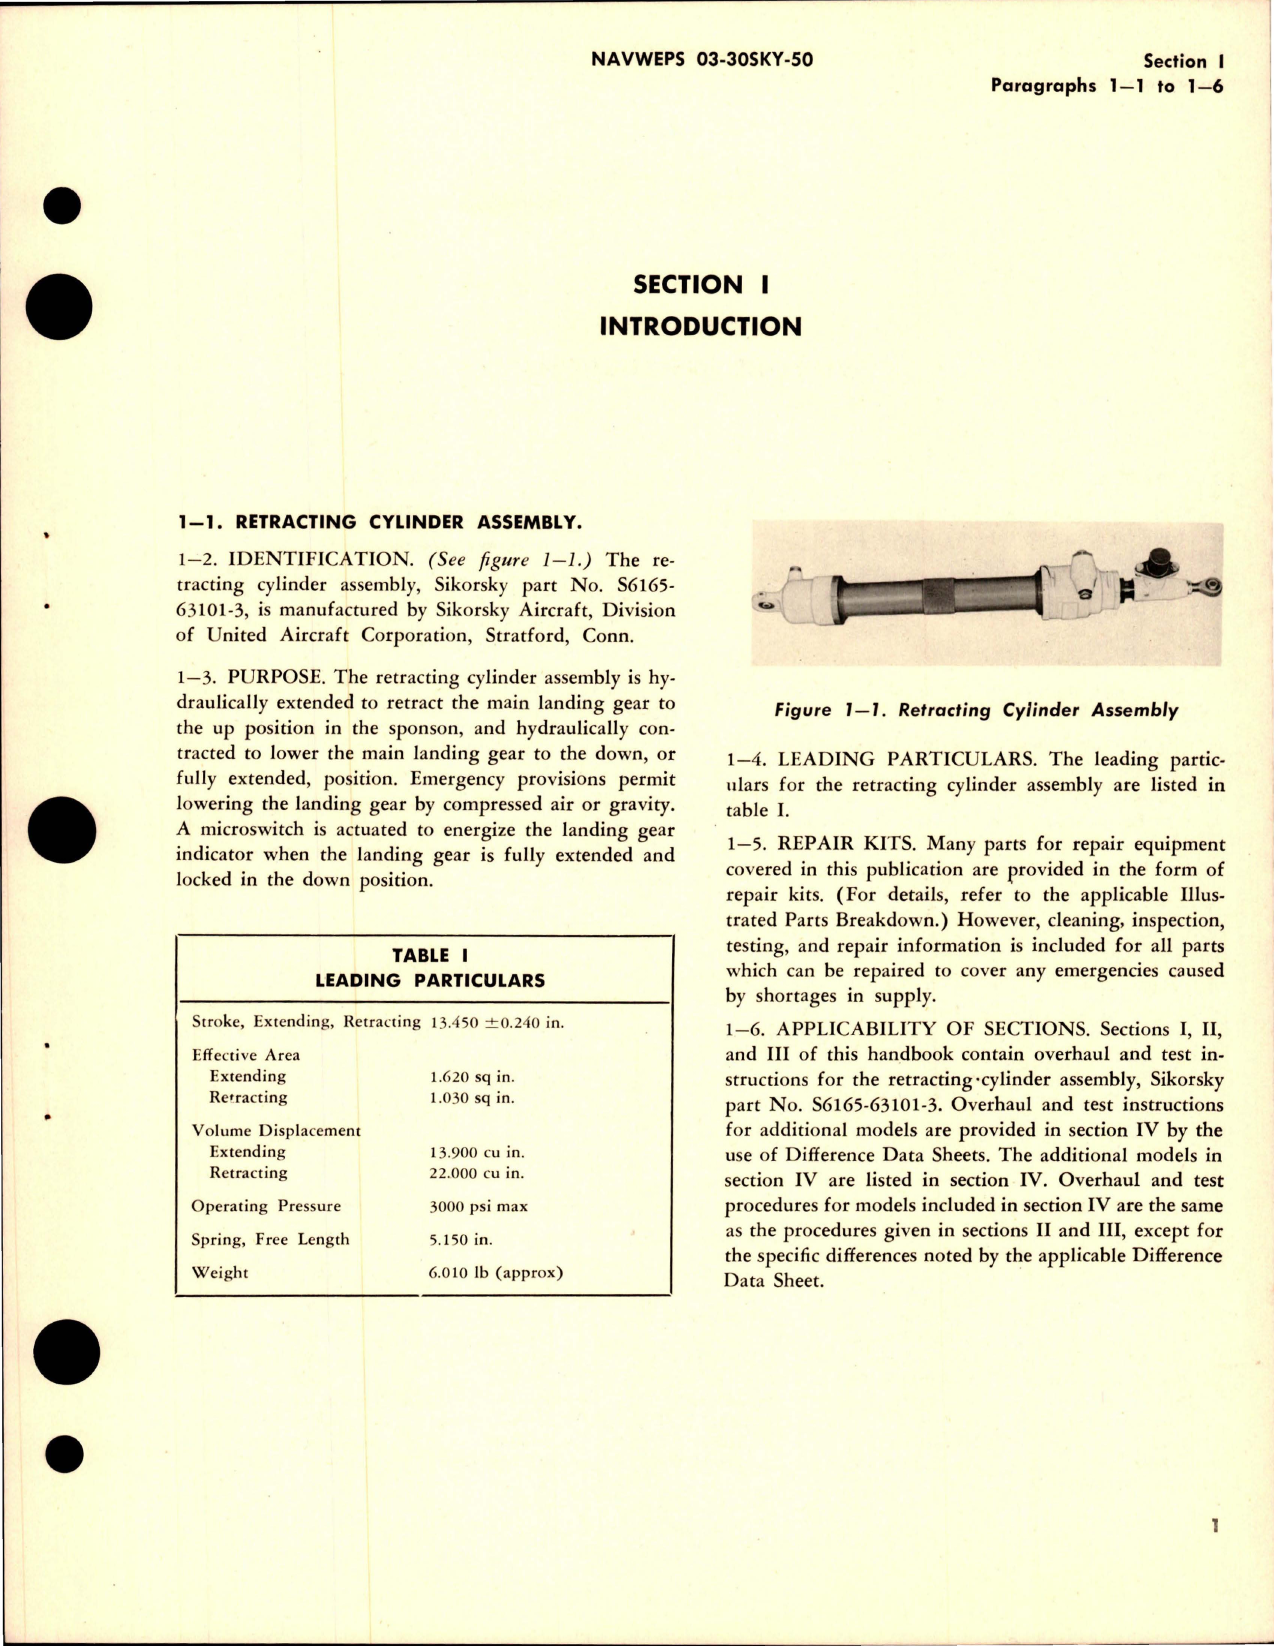 Sample page 5 from AirCorps Library document: Overhaul Instructions for Retracting Cylinder Assembly - Parts S6165-63101-3 and S6165-63101-4 